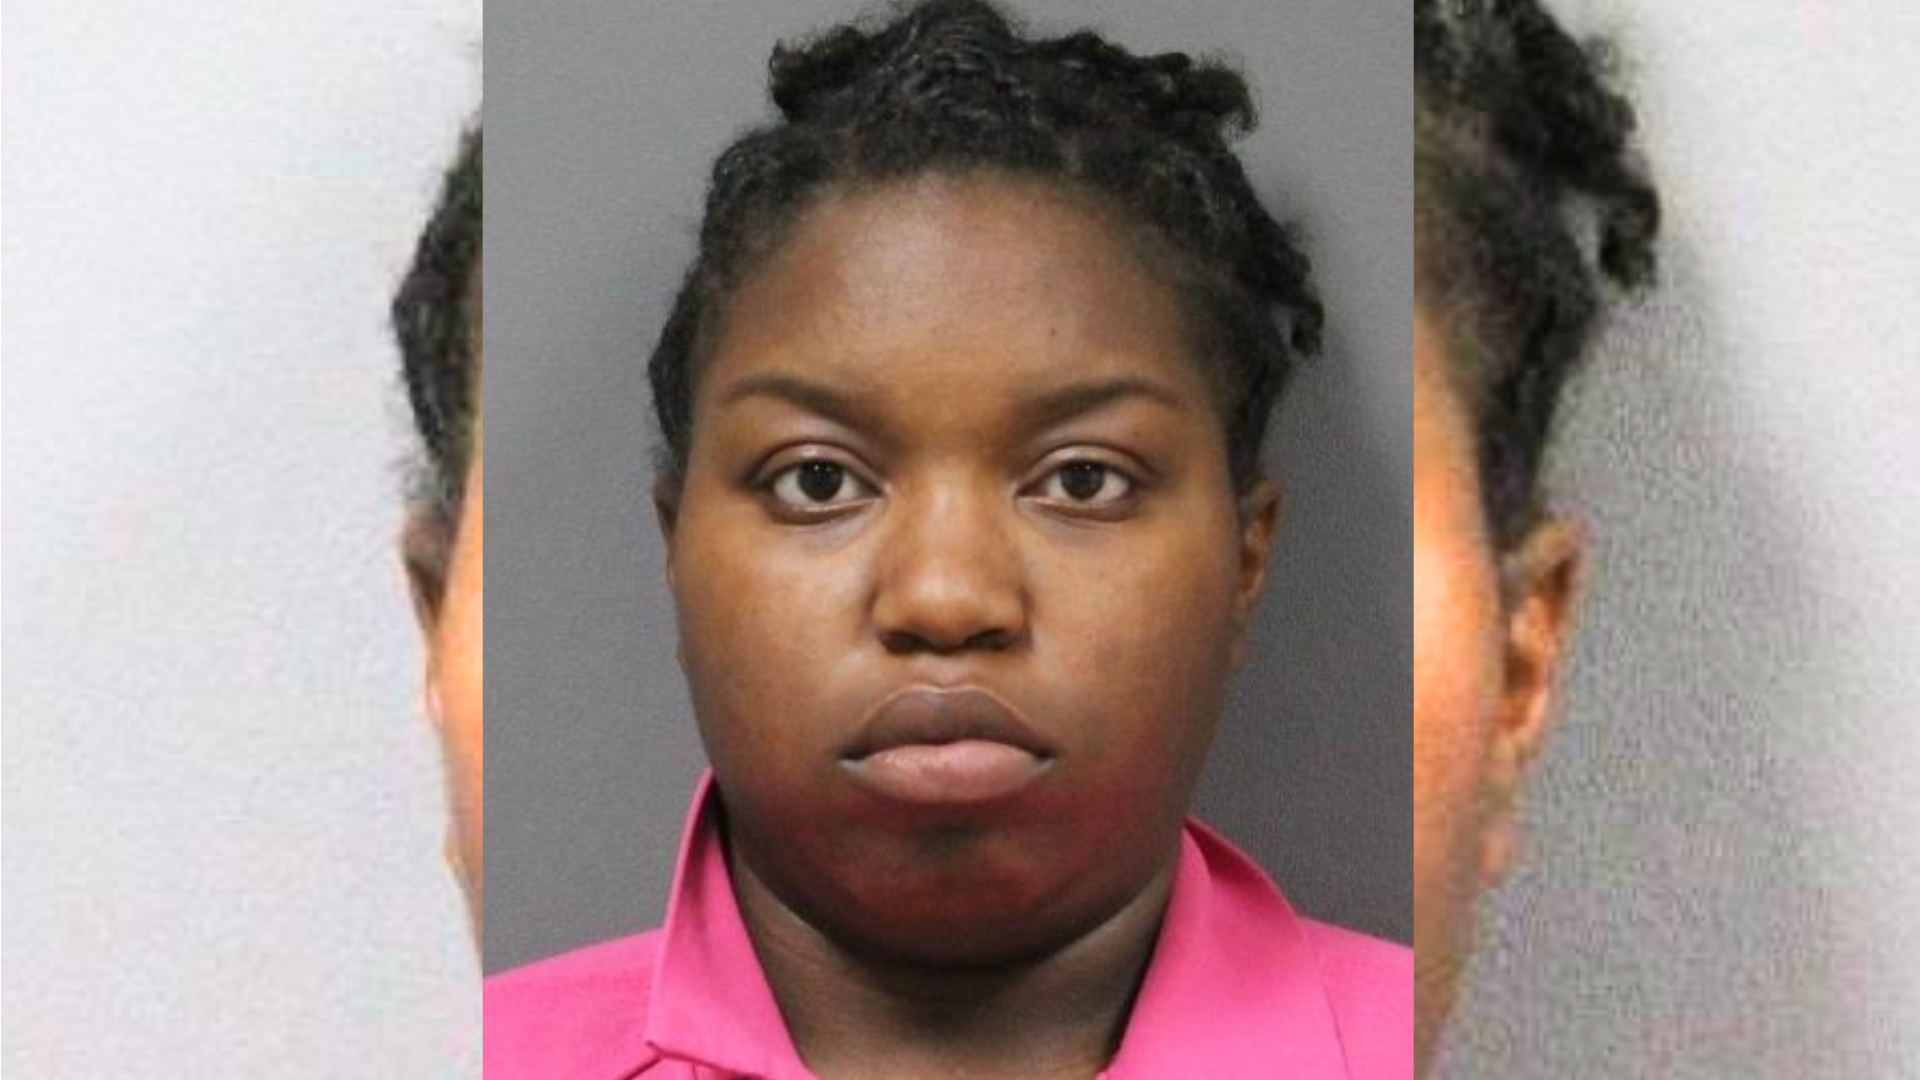 Mississippi mom arrested in death of her 22-month-old child, police say News fox13memphis